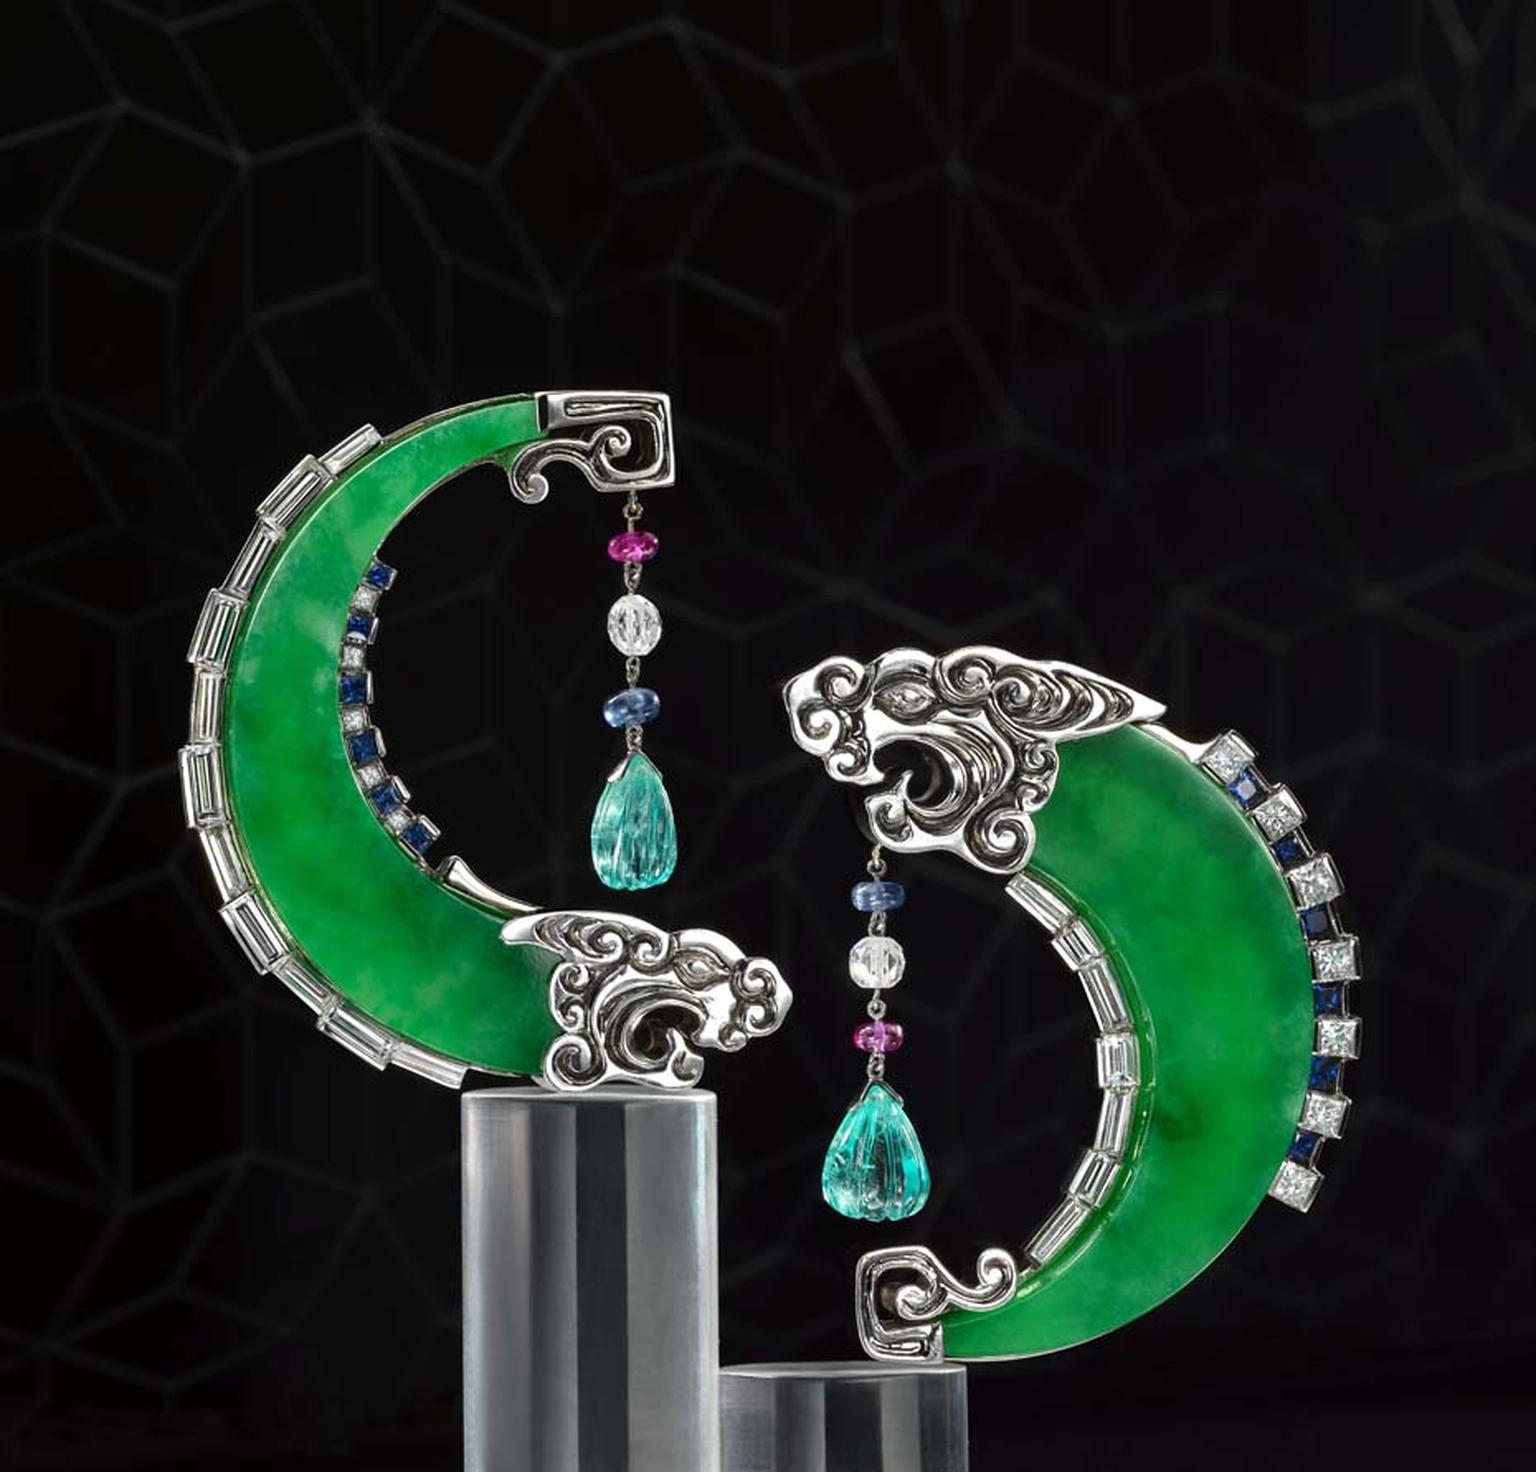 Samuel Kung's Dragon earrings are an auspicious, classical Chinese motif set with Imperial green jadeite, diamonds, sapphires and aquamarine.